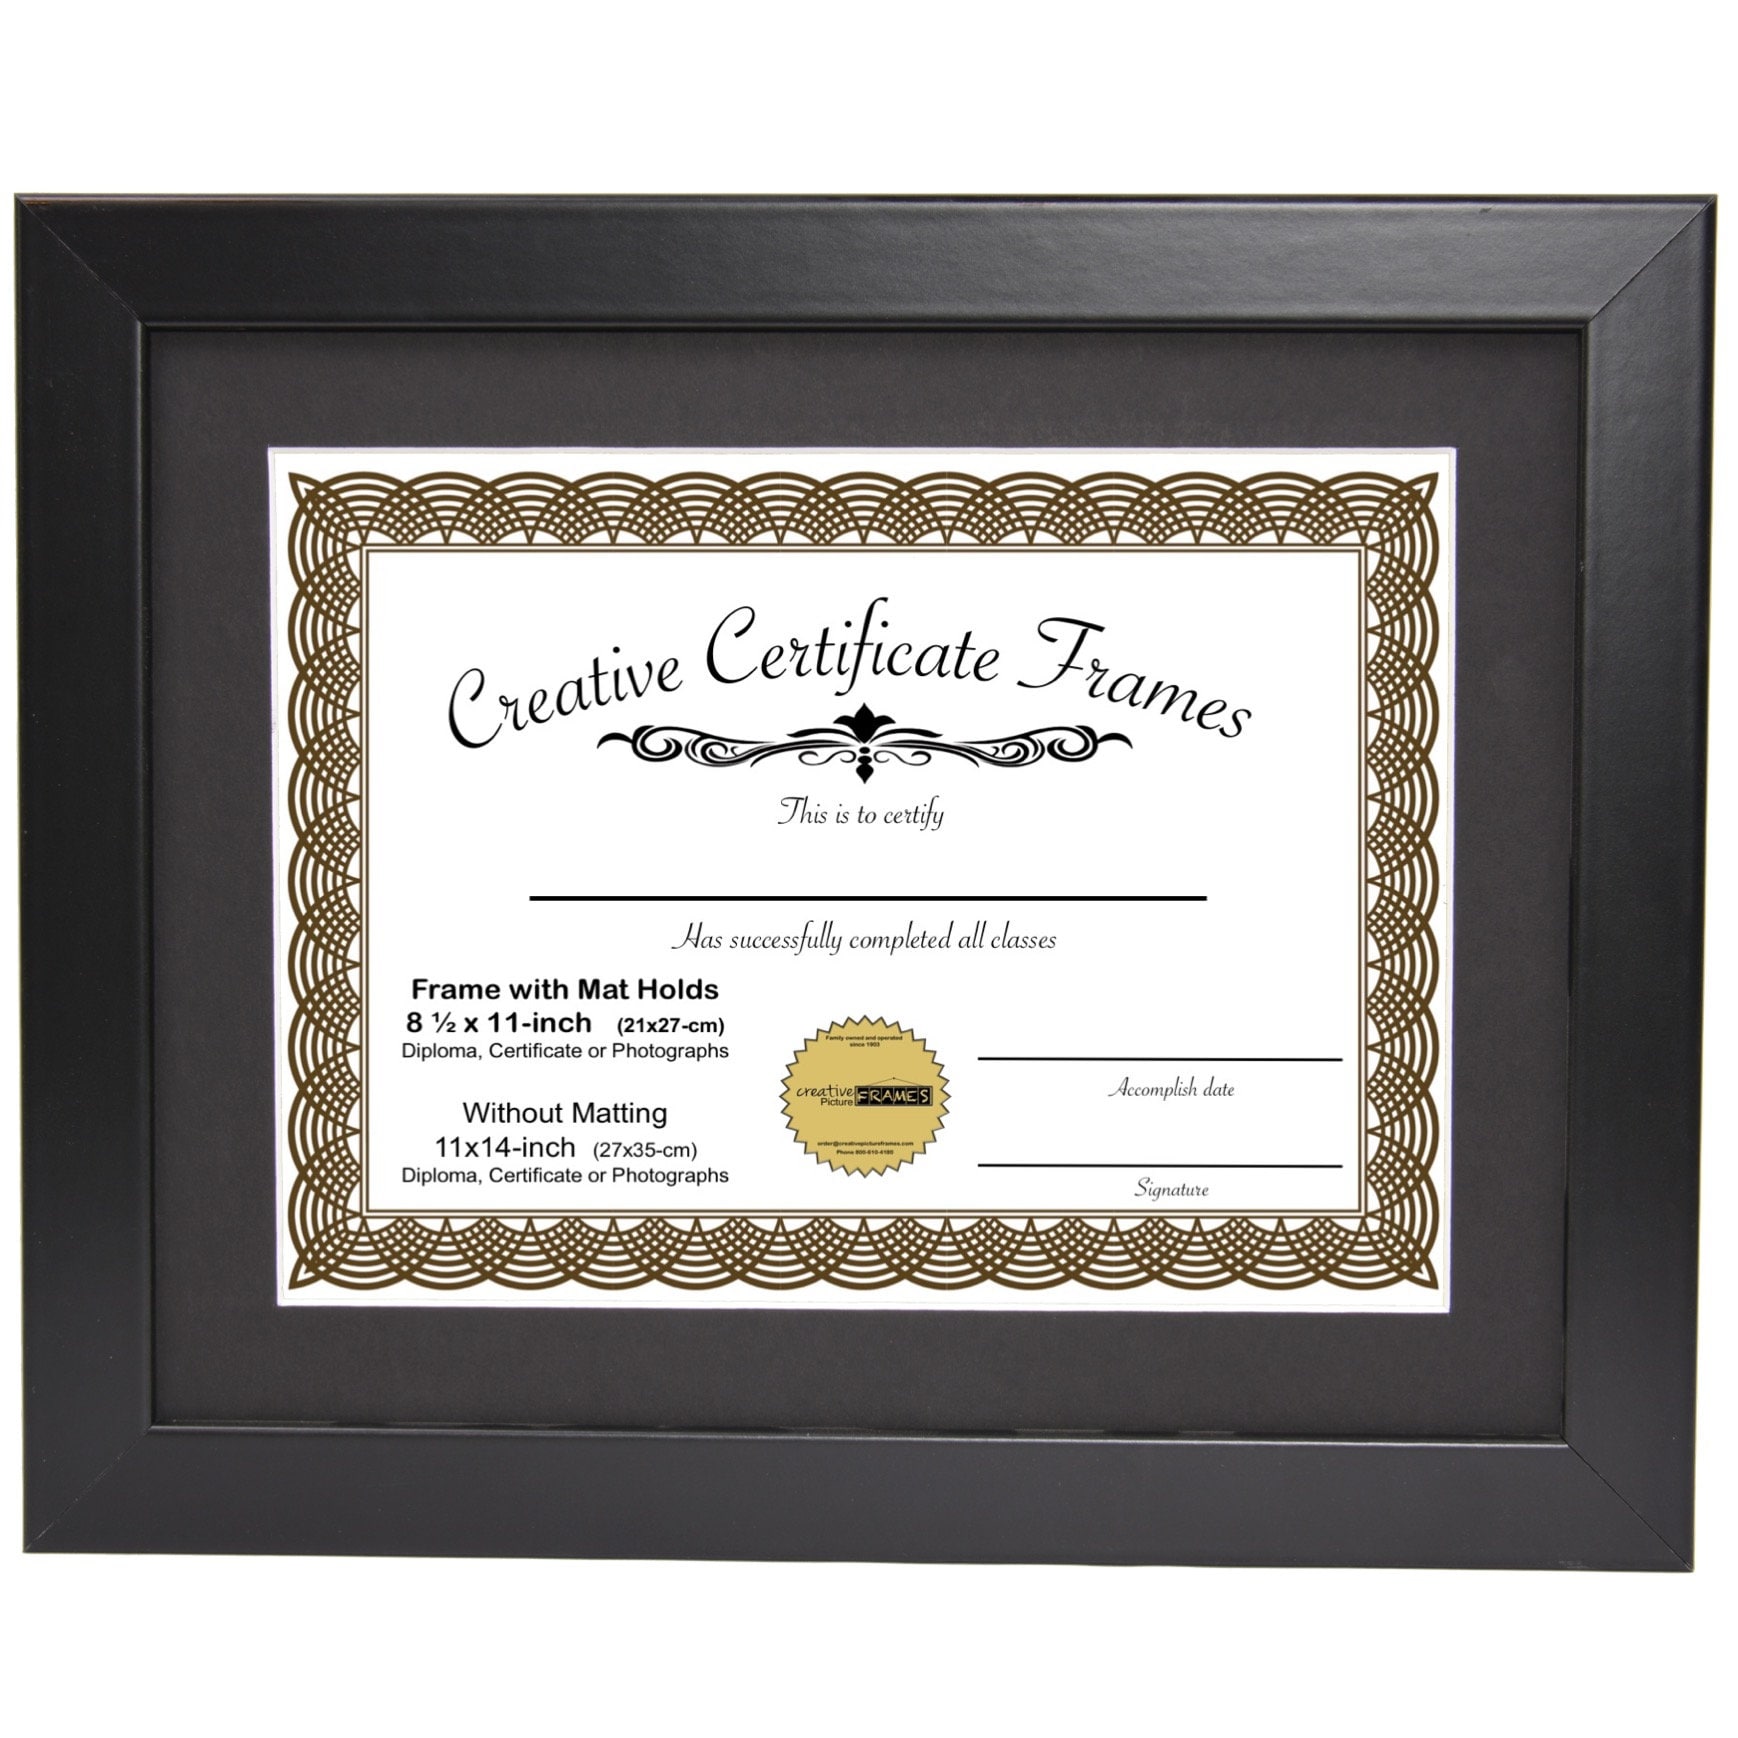 11x14 Document Photo Wood Frame Double Mat for 8.5x11 Diploma/Certificates Black 